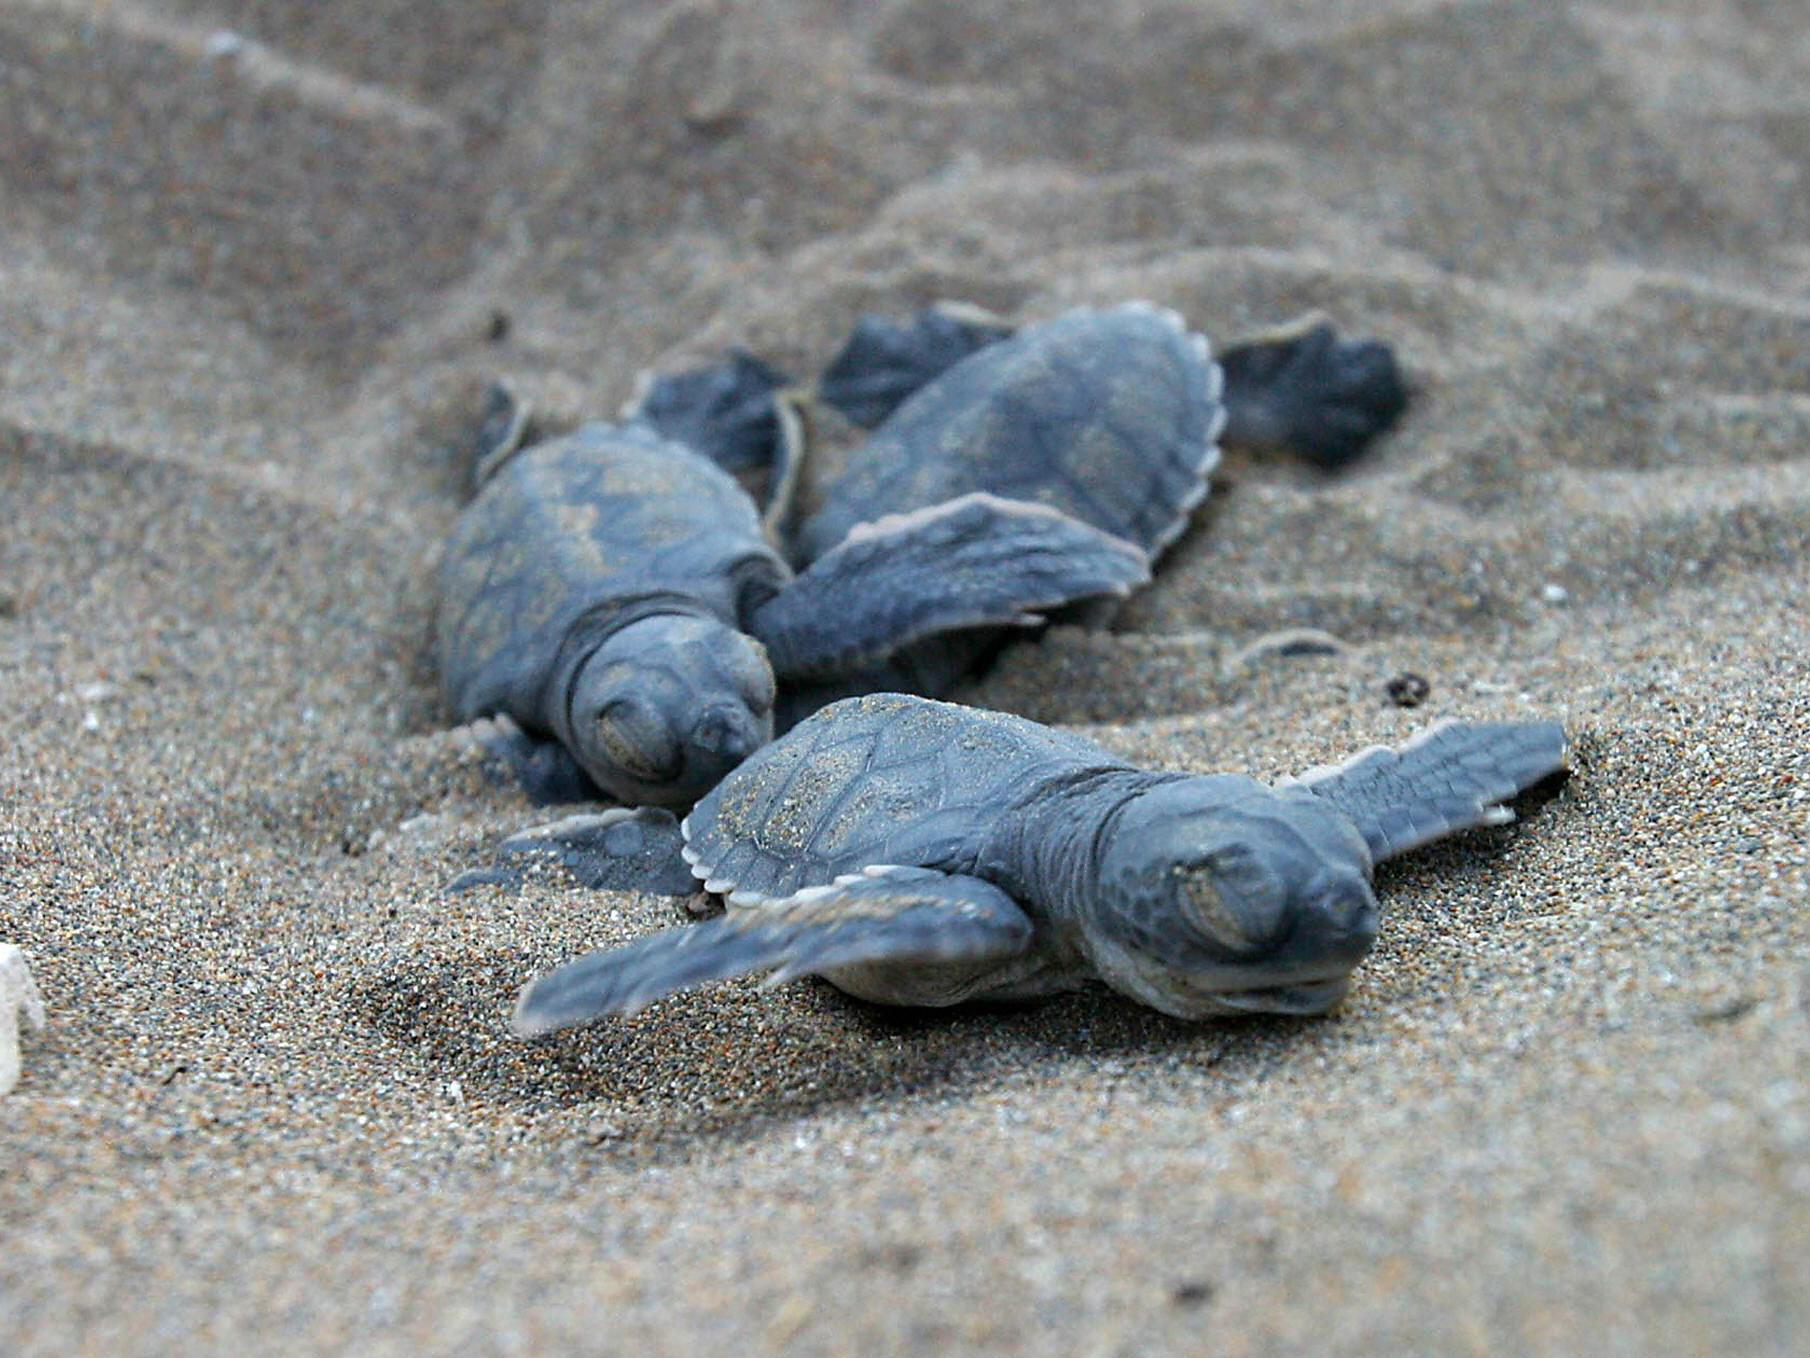 As a result of rising temperatures, nearly all the green turtles being born on certain beaches in Australia are female